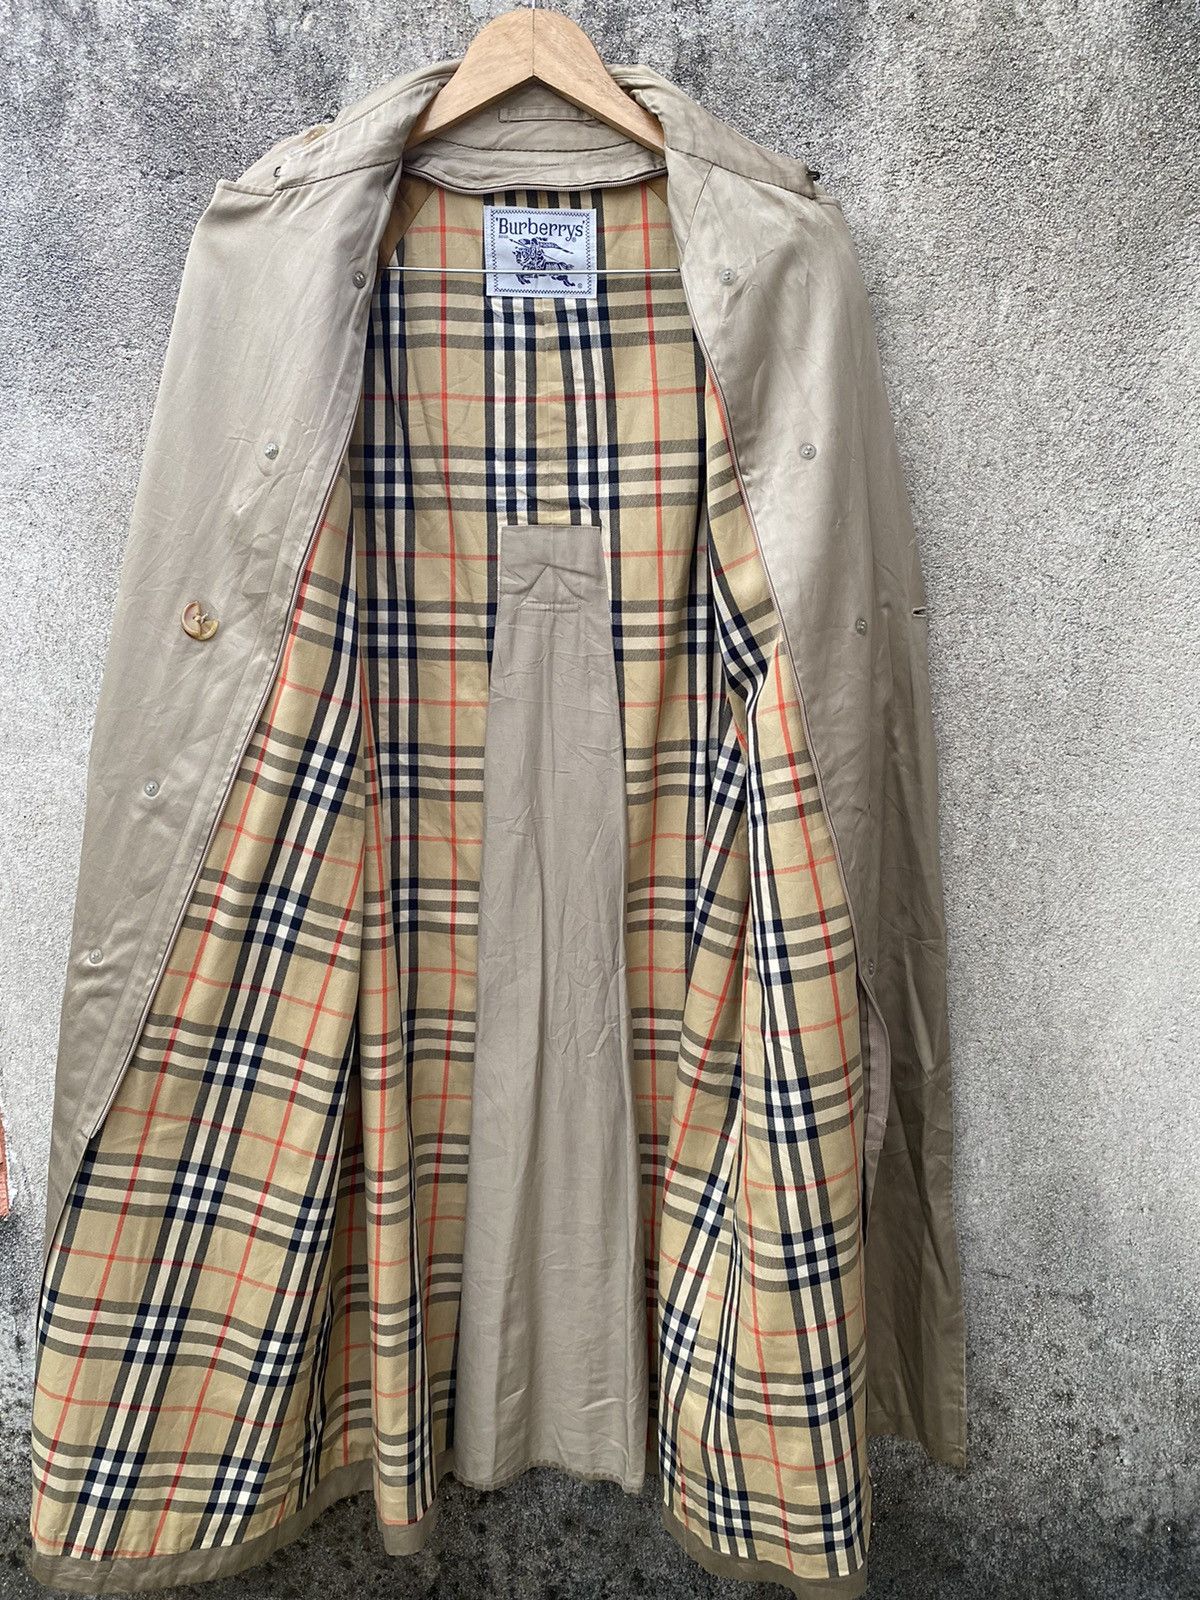 Burberry Prorsum - Burberrys Double Breasted Trench Coat Nova Check - 3